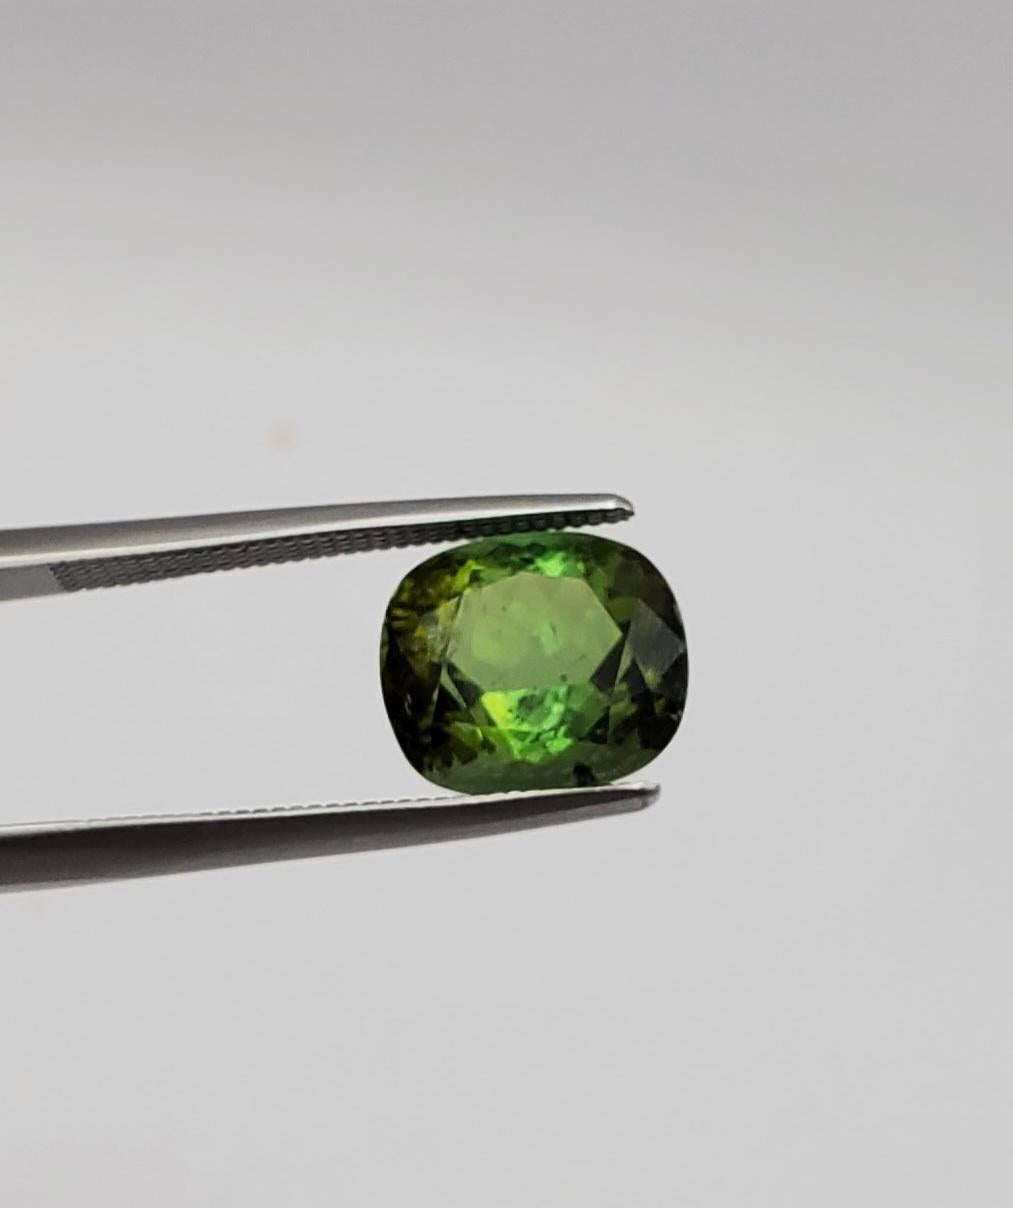 Presenting a captivating apple green tourmaline of exceptional quality. This gemstone weighs 4.21 carats, boasting substantial size and allure. The dimensions measure 10.42 mm in length, 9.17 mm in width, and 6.52 mm in height, creating a